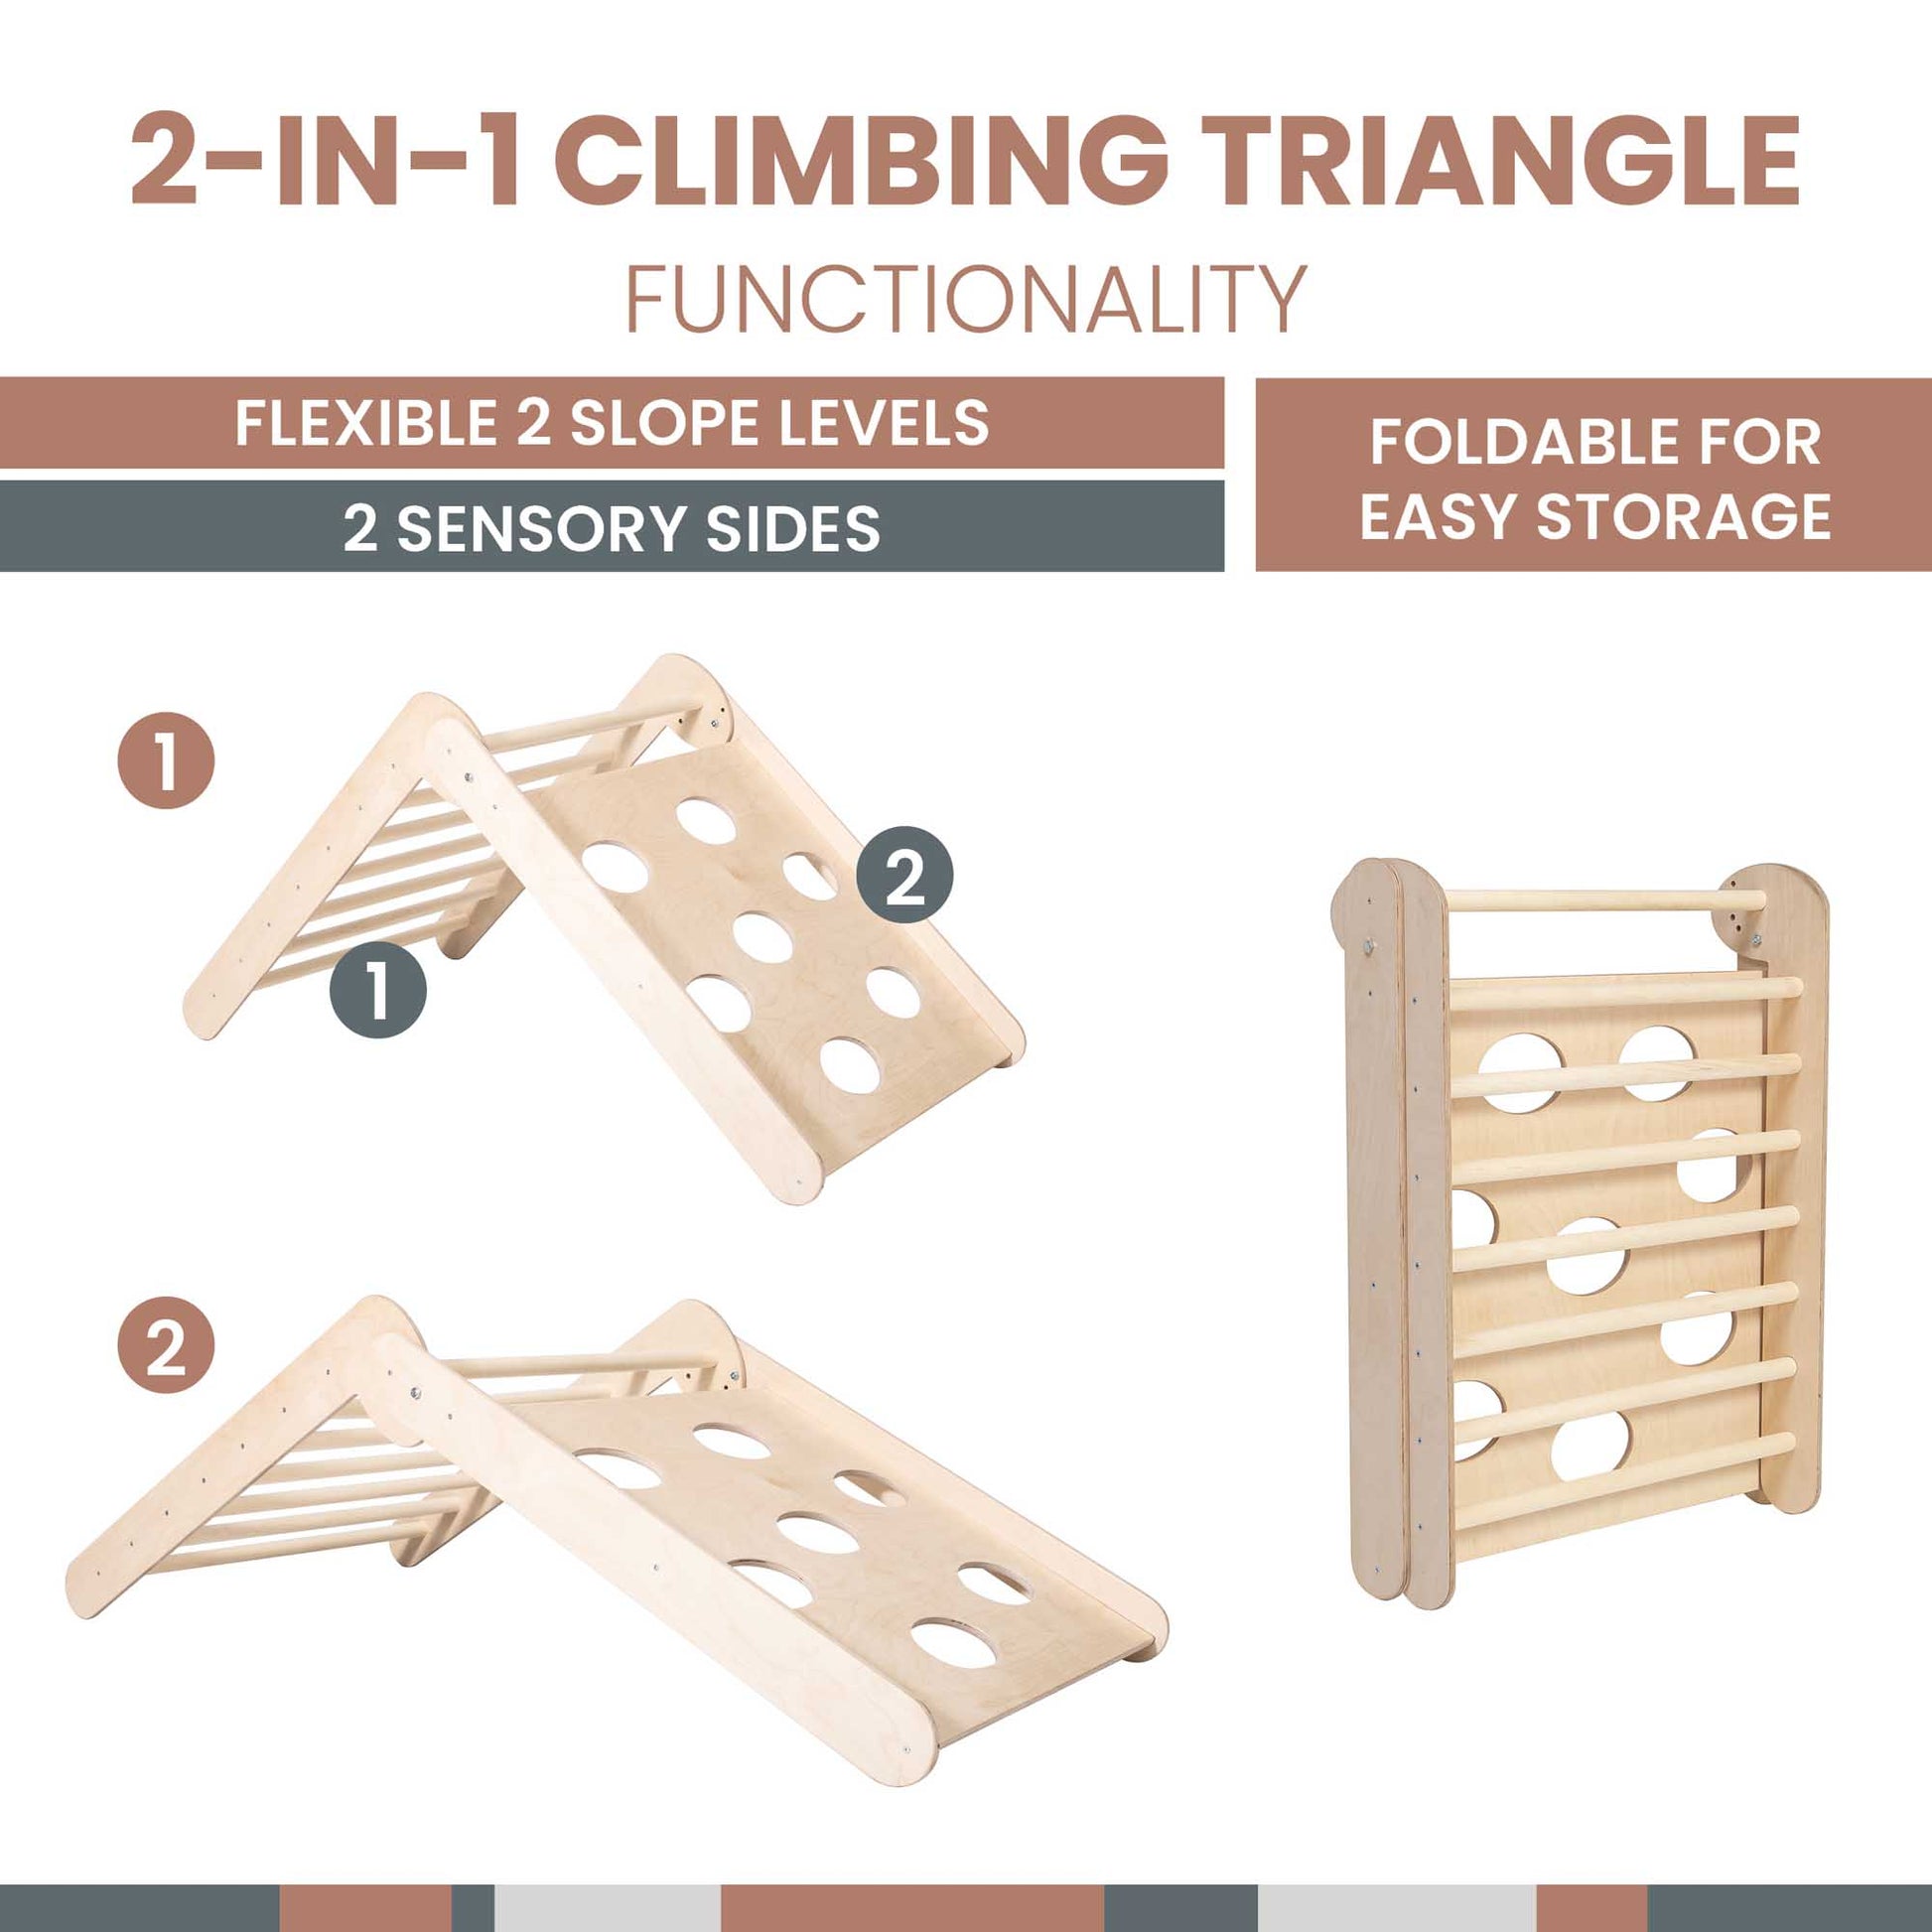 Foldable 2-in-1 climbing triangle with sensory sides, 2 slope levels for dynamic play, and convenient storage design.